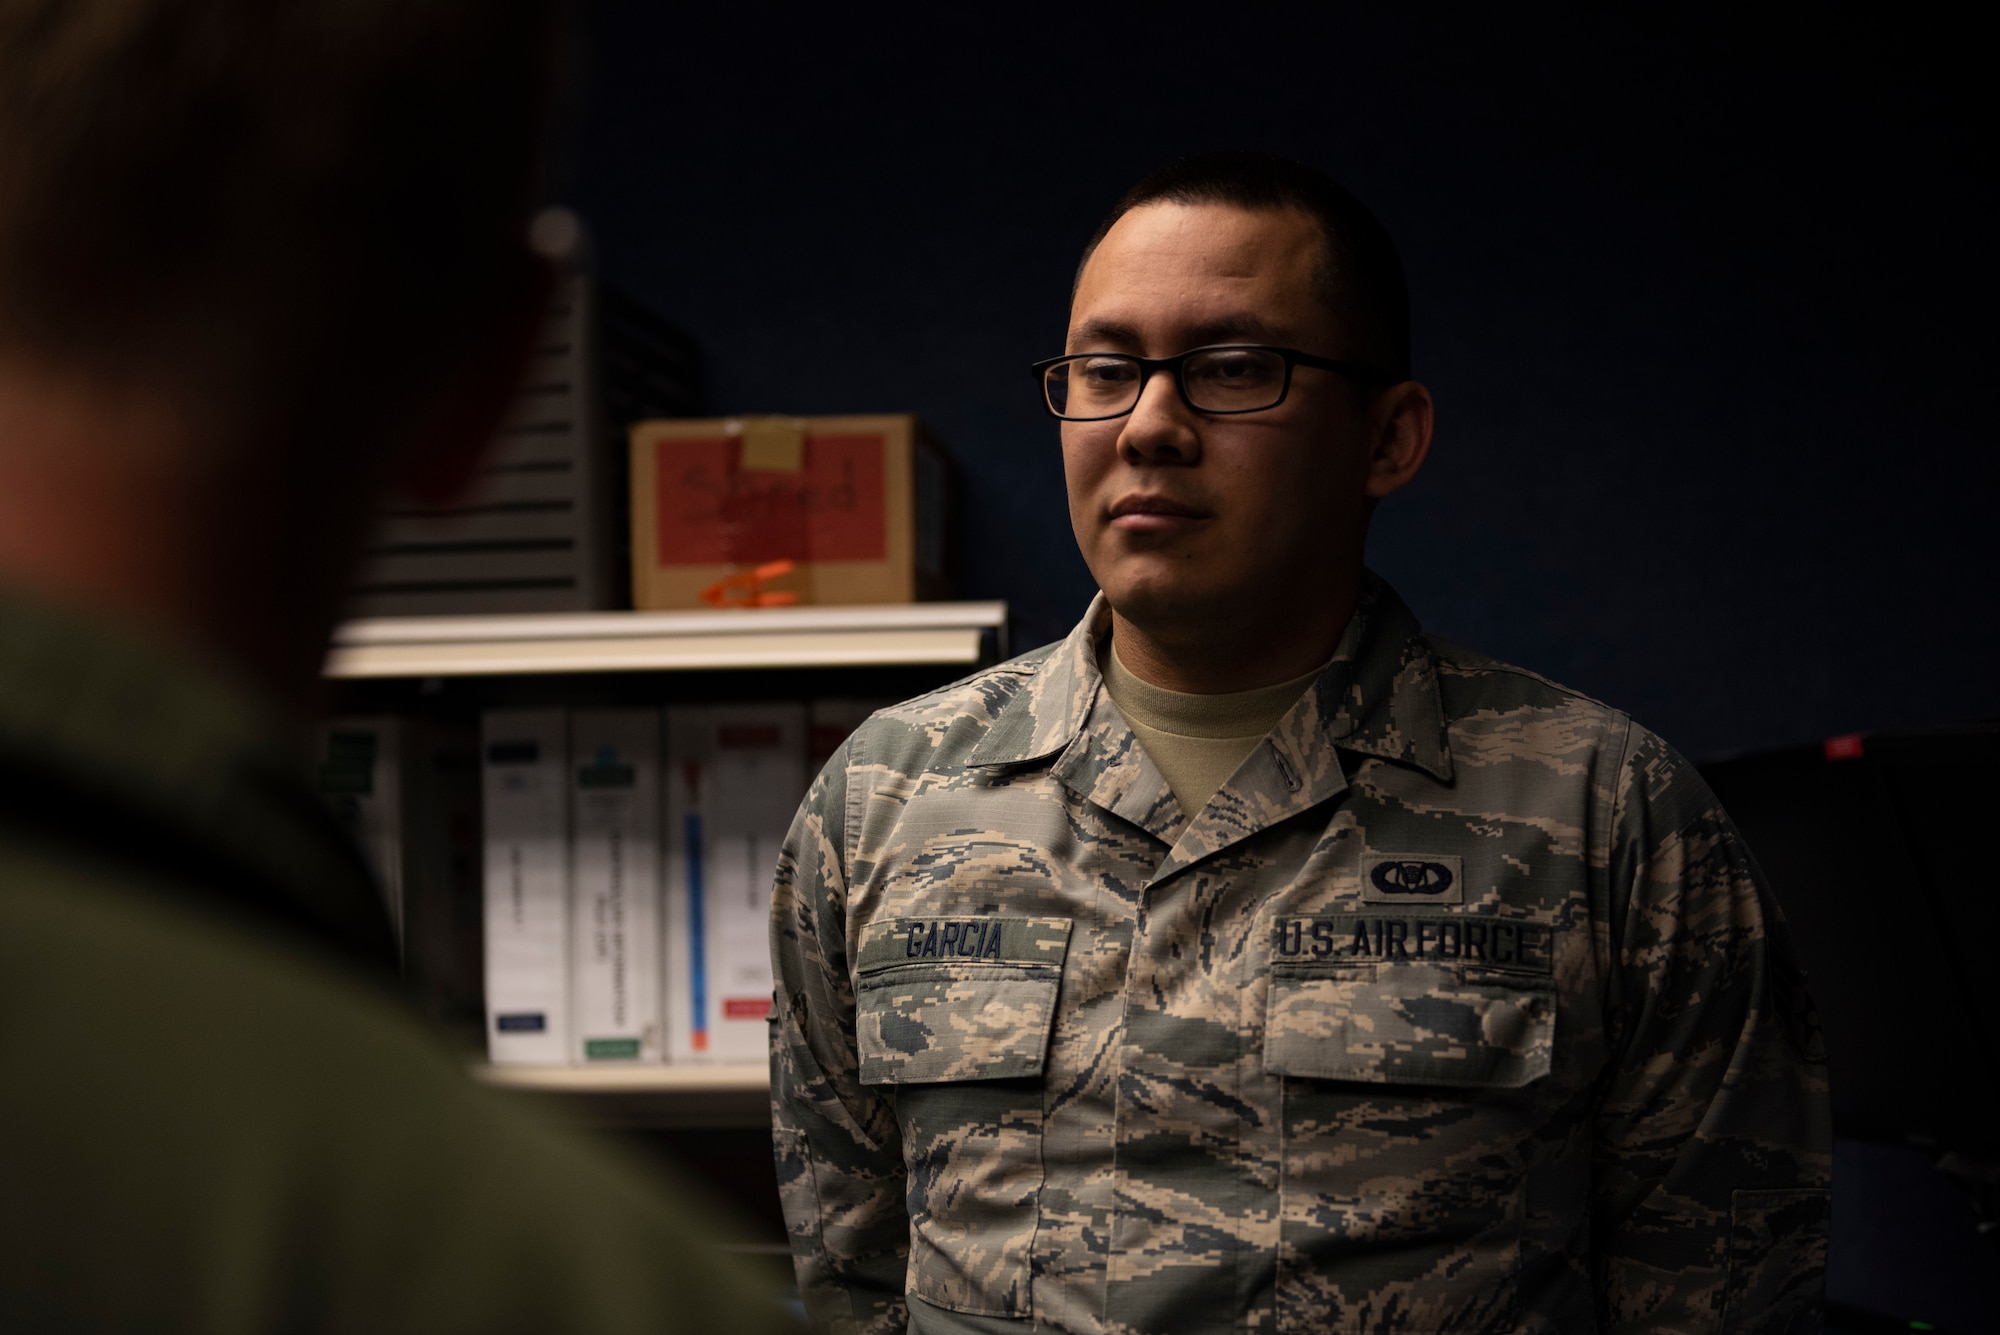 U.S. Air Force Senior Airman Alan Garcia, 325th Fighter Wing Tyndall Command Center junior emergency actions controller, right, briefs U.S. Air Force Col. Brain Laidlaw, 325th Fighter Wing commander, left, at Tyndall Air Force Base, Florida, Jan. 24, 2020. Garcia, originally from El Paso, Texas, was selected to participate in the wing's Airman Shadow program because of his dedication to the command and control mission. (U.S. Air Force photo by Staff Sgt. Magen M. Reeves)